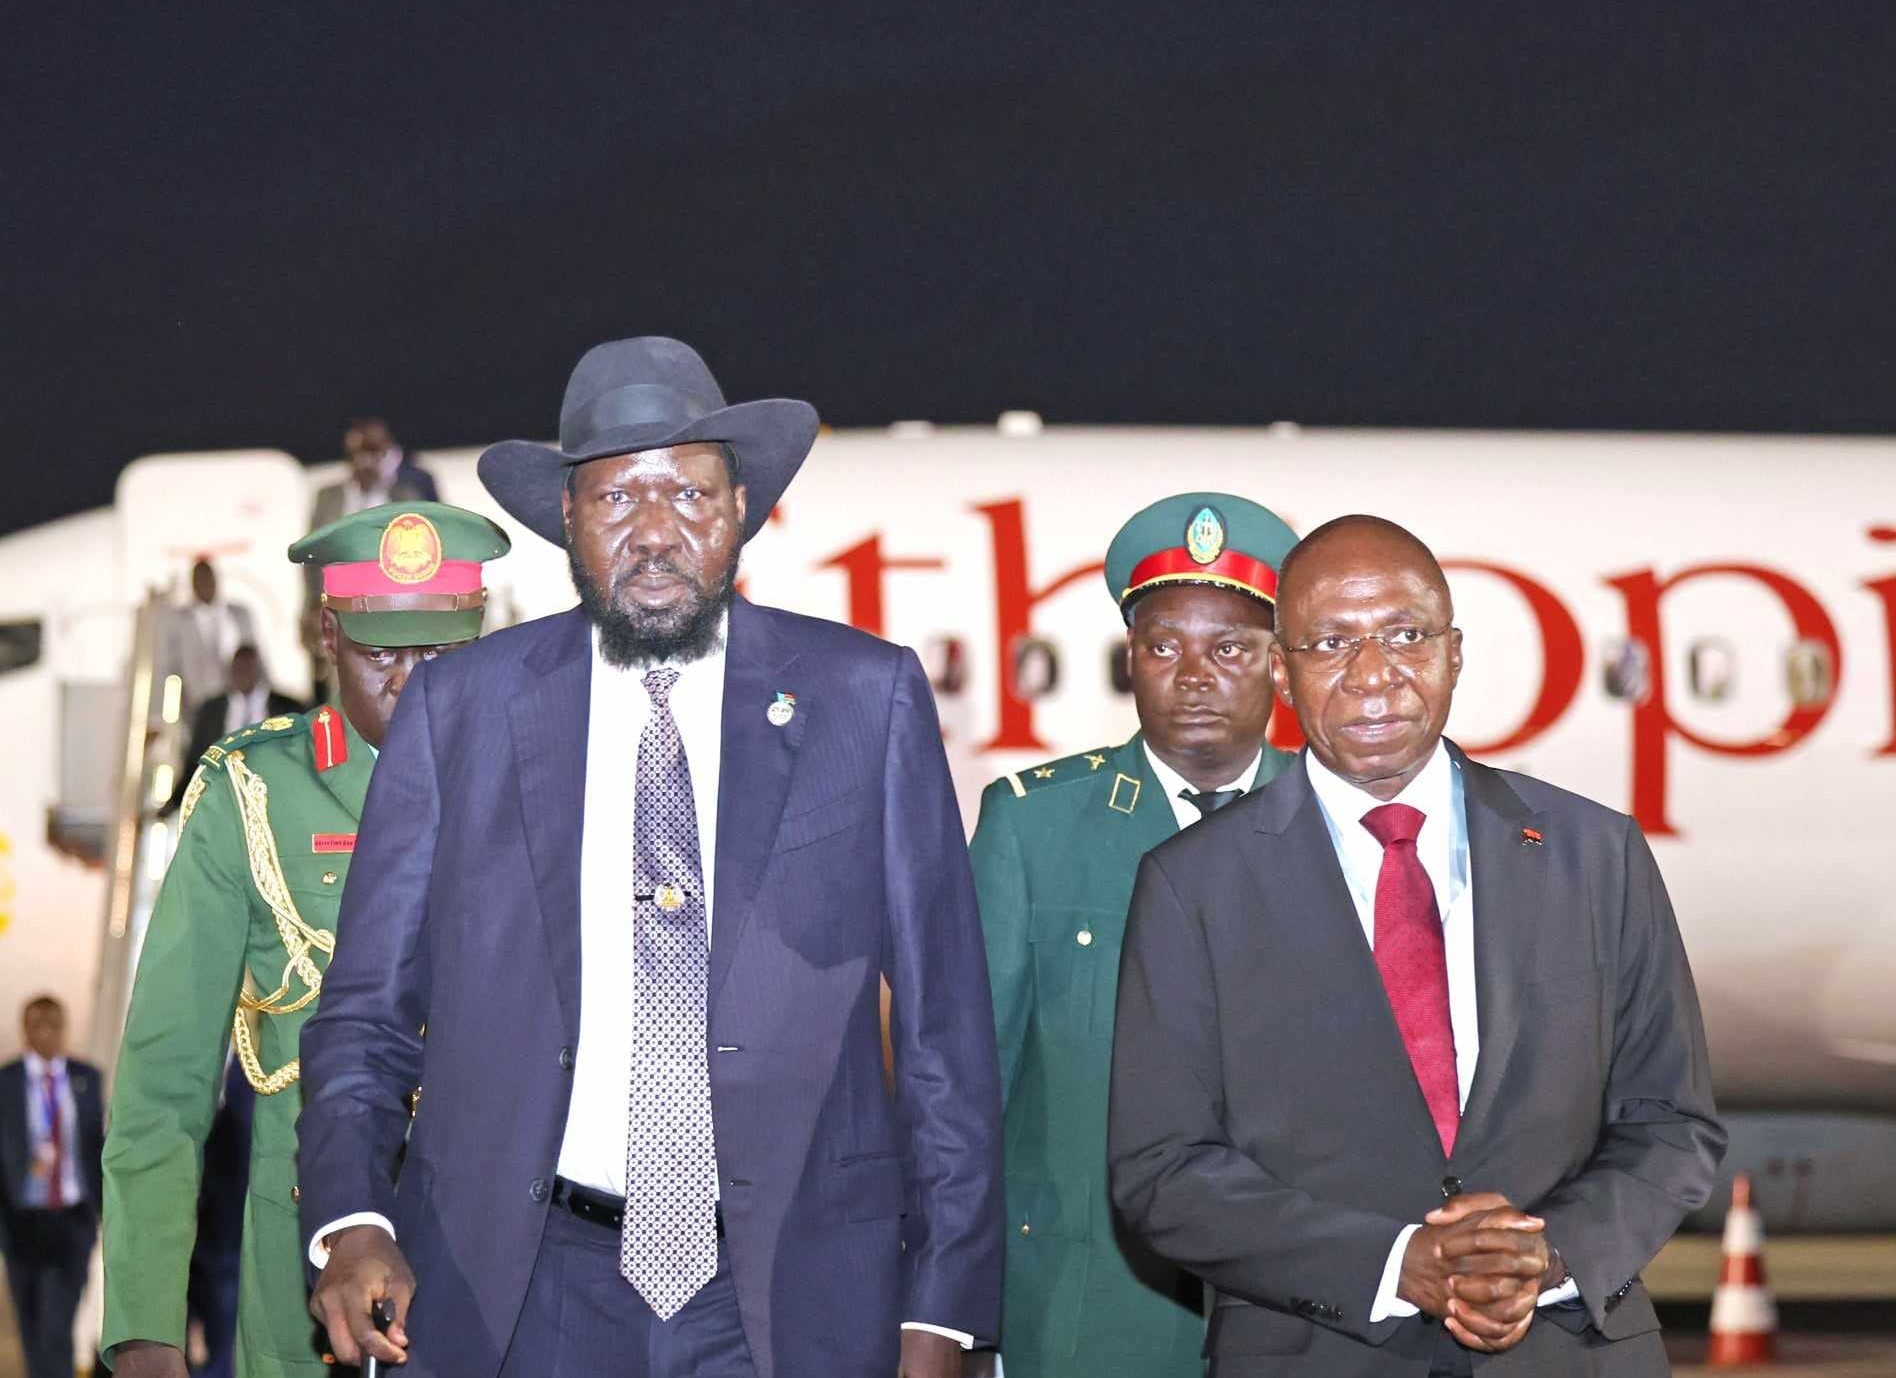 Kiir in Angola for talks on ending regional conflicts